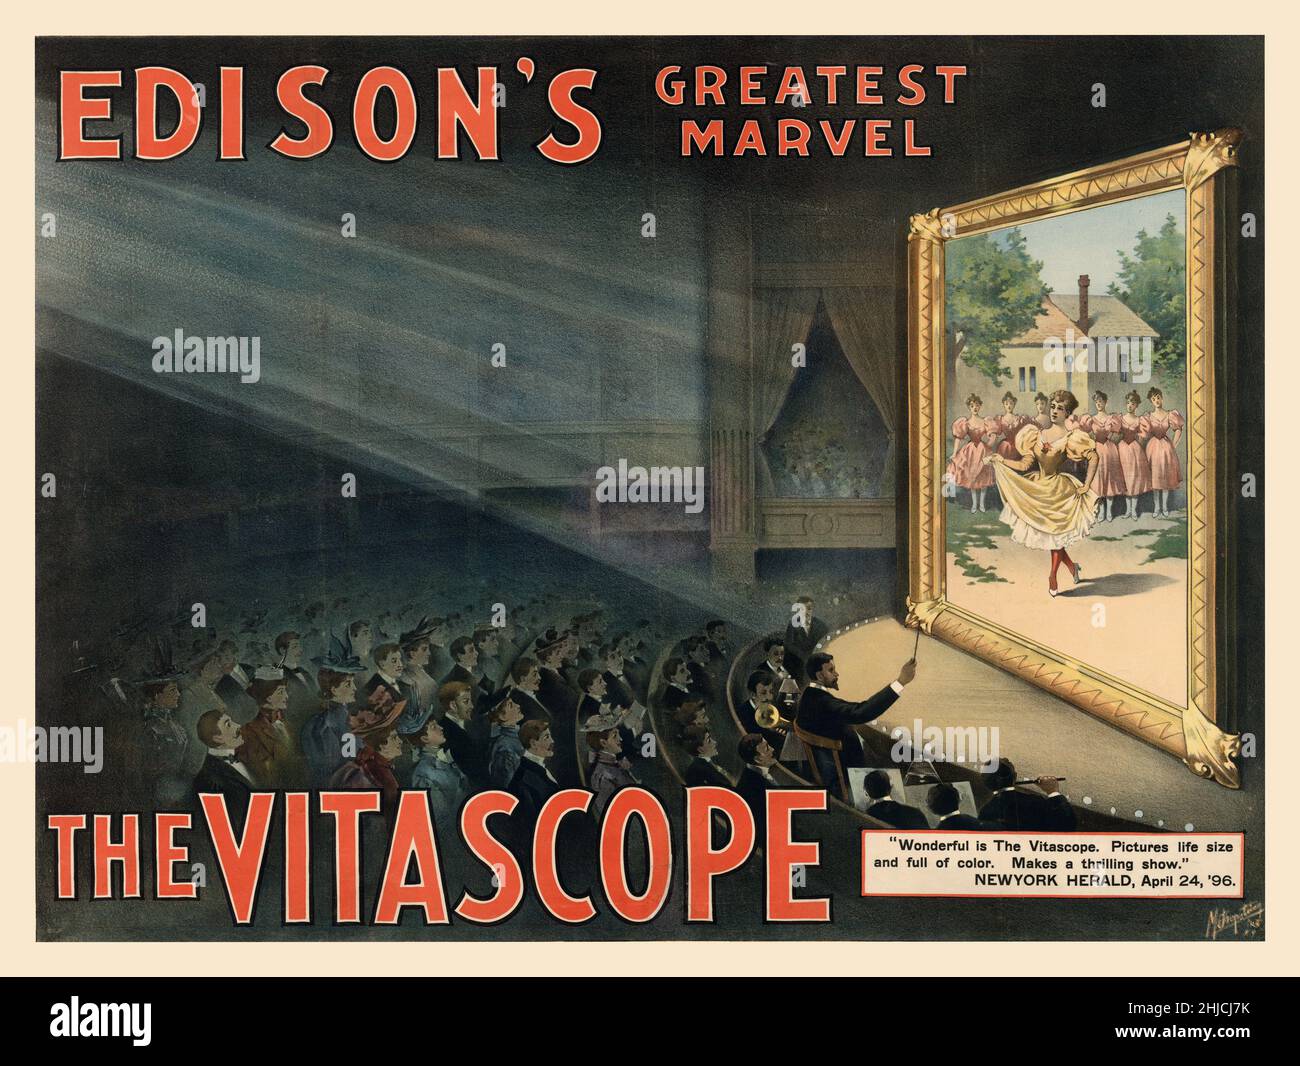 A poster showing an audience and 'Edison's greatest marvel, The Vitascope.' Metropolitan Print Company, c. 1896. Vitascope was an early film projector patented in 1895 by Charles Francis Jenkins and Thomas Armat. It was adopted by Thomas Edison to project his Kinetoscope films in the first Nickelodeon theater. Stock Photo